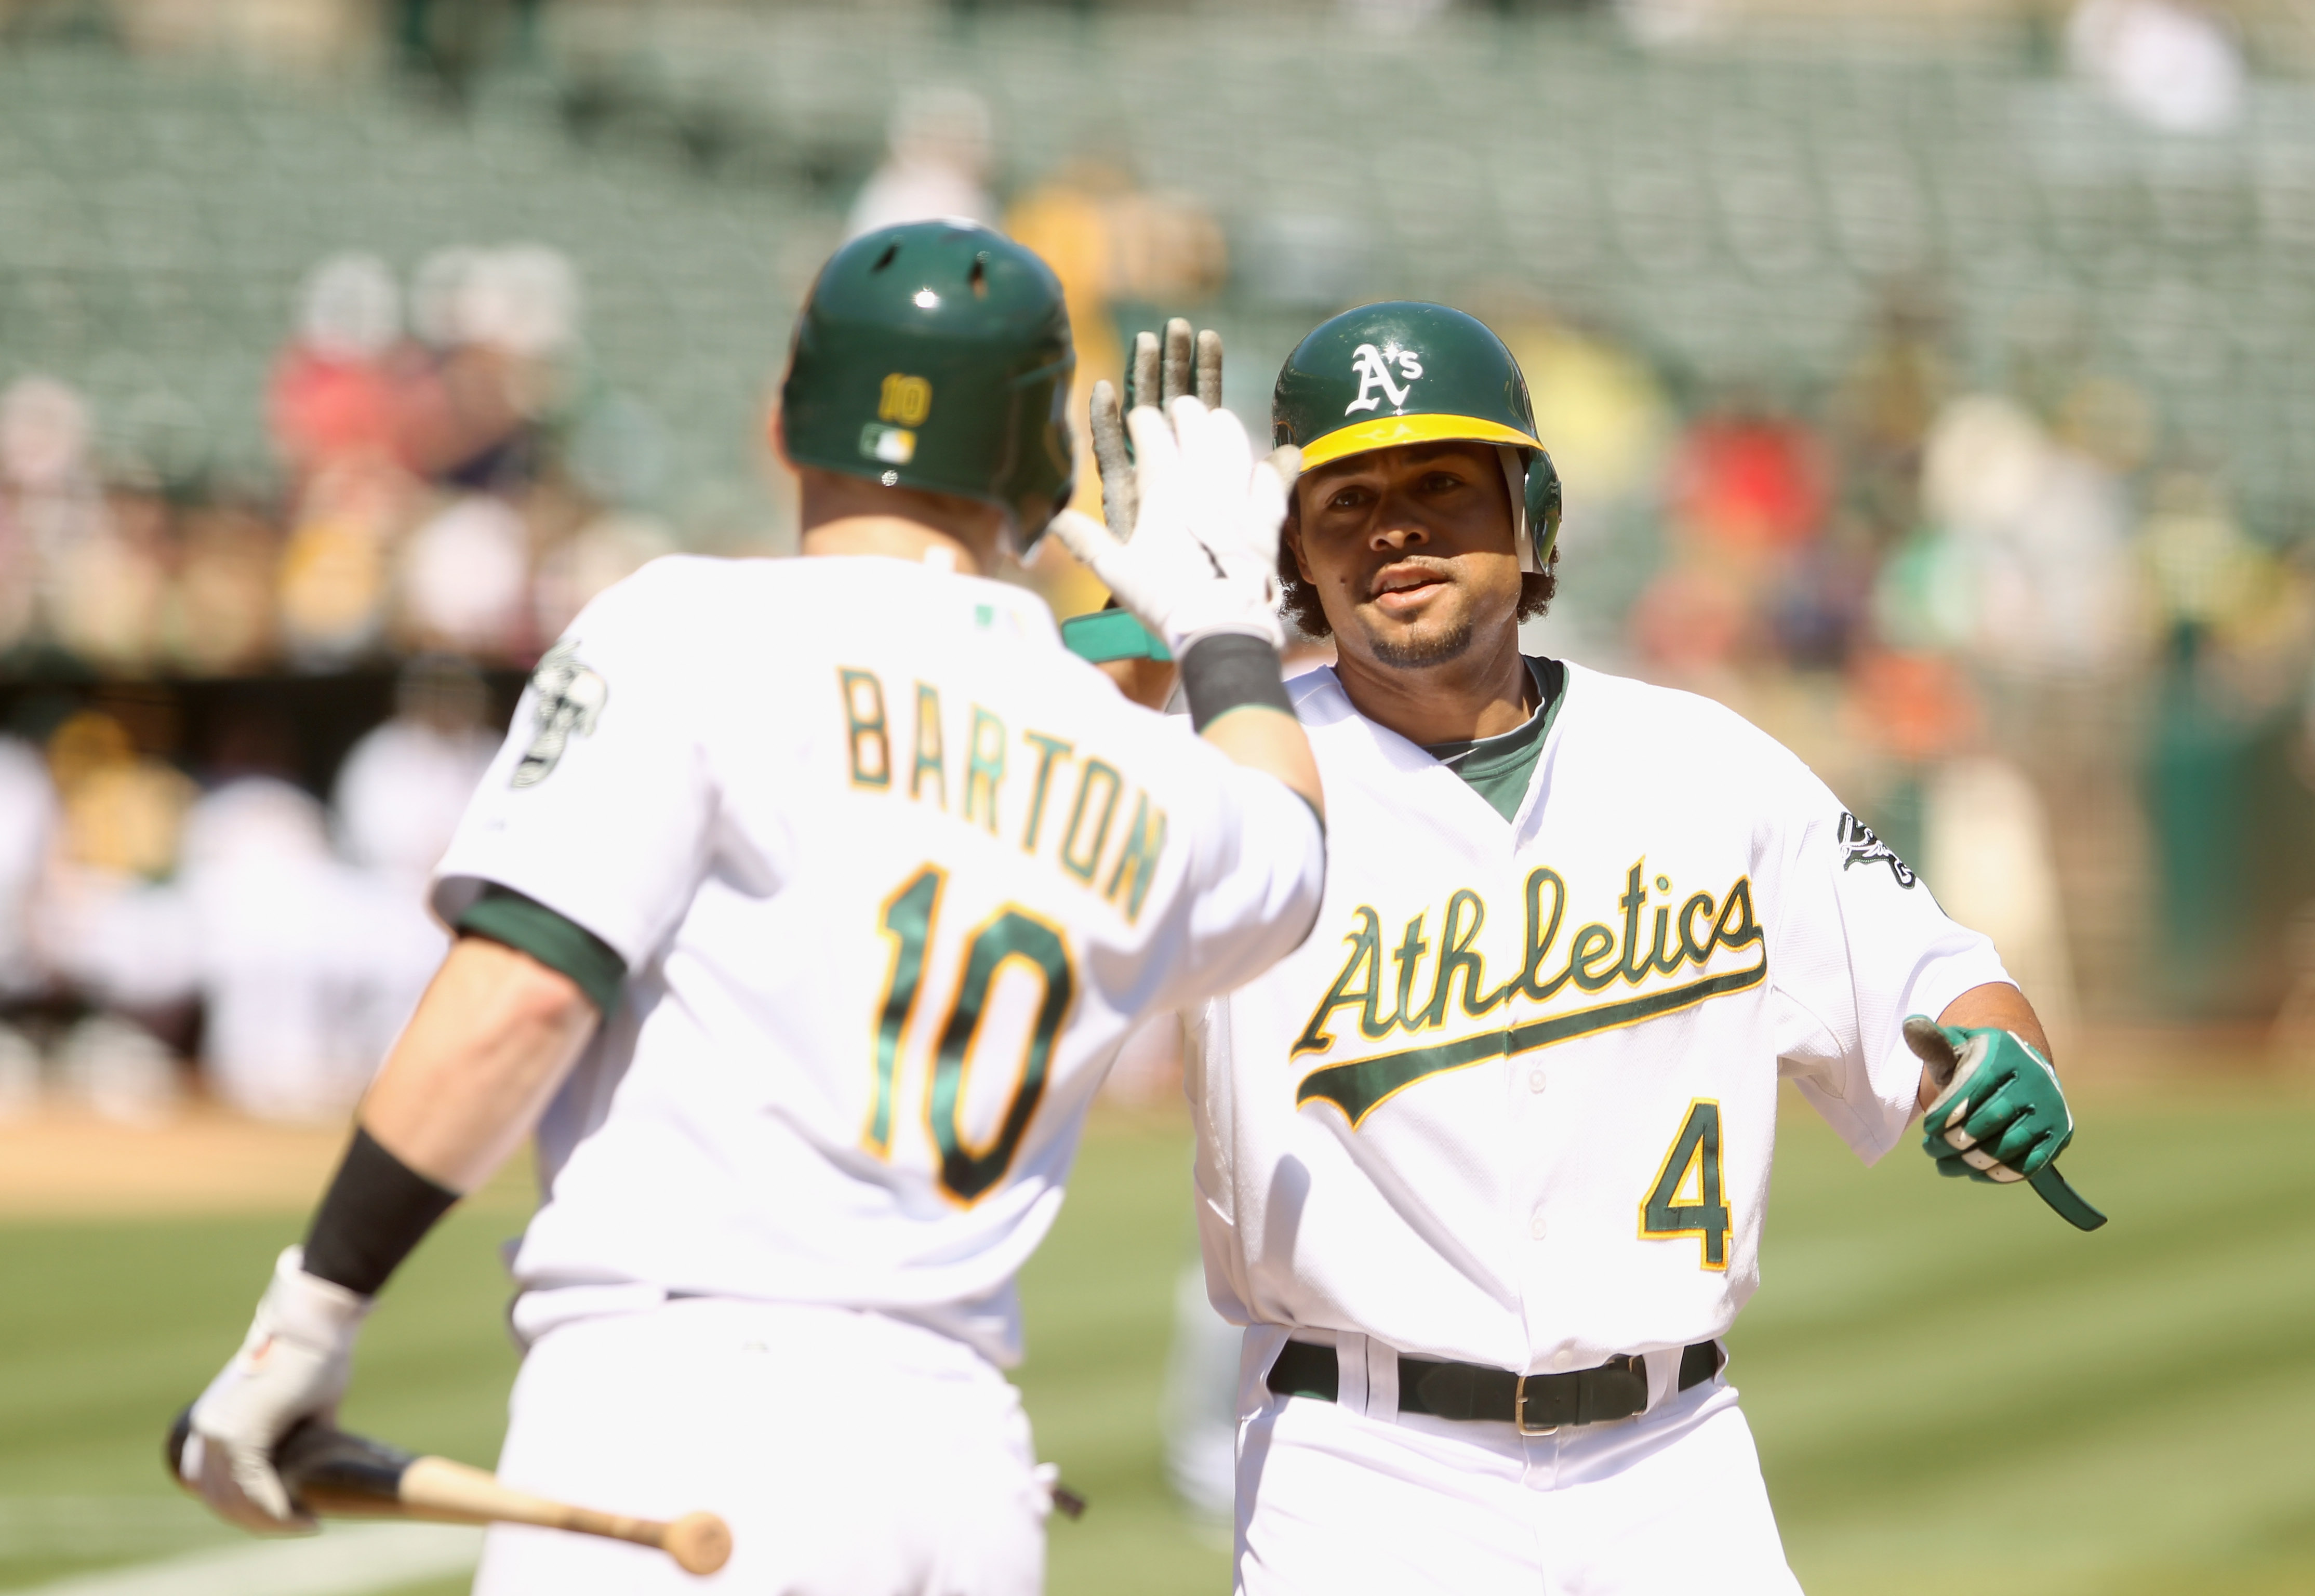 OAKLAND, CA - SEPTEMBER 06:  Coco Crisp #4 of the Oakland Athletics is congratulated by Daric Barton #10 after Crisp hit a lead off home run against the Seattle Mariners at the Oakland-Alameda County Coliseum on September 6, 2010 in Oakland, California.